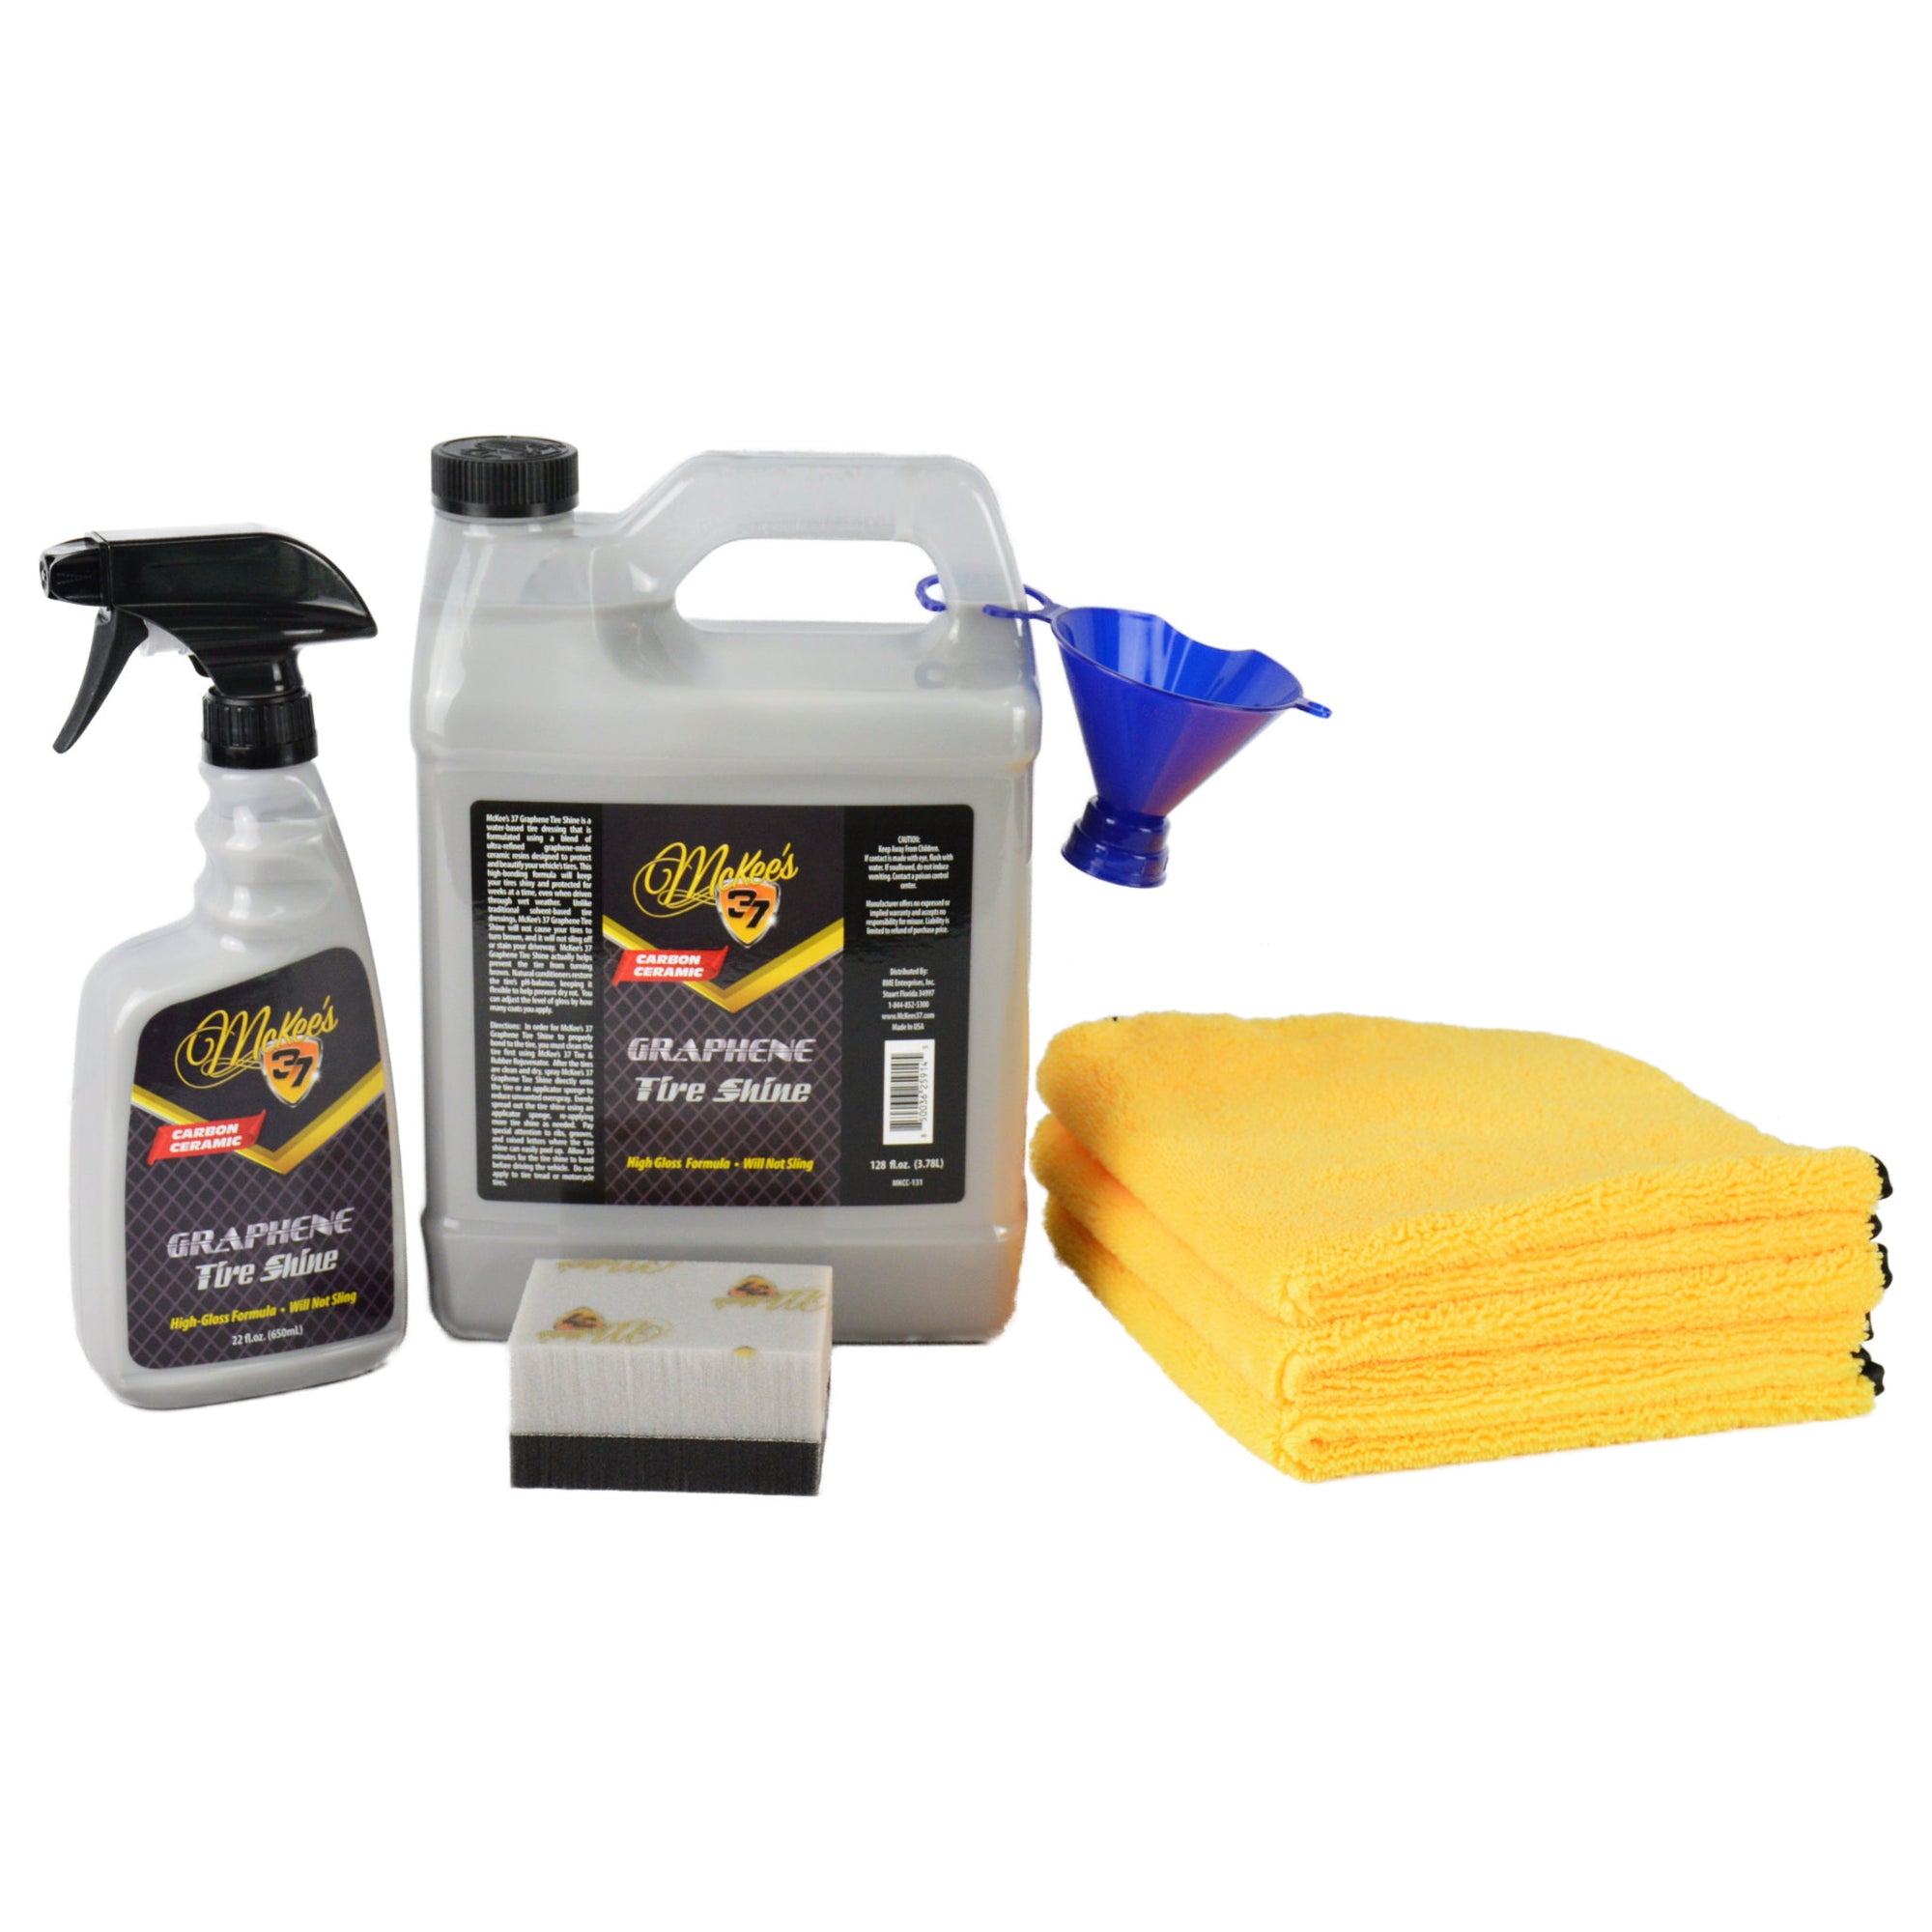 Ethos Graphene Shine - Trim & Tire Shine Spray, High Sheen, Non Greasy, Sling Free Finish! Conditions and Protects Rubber with UV Protection (Gallon)